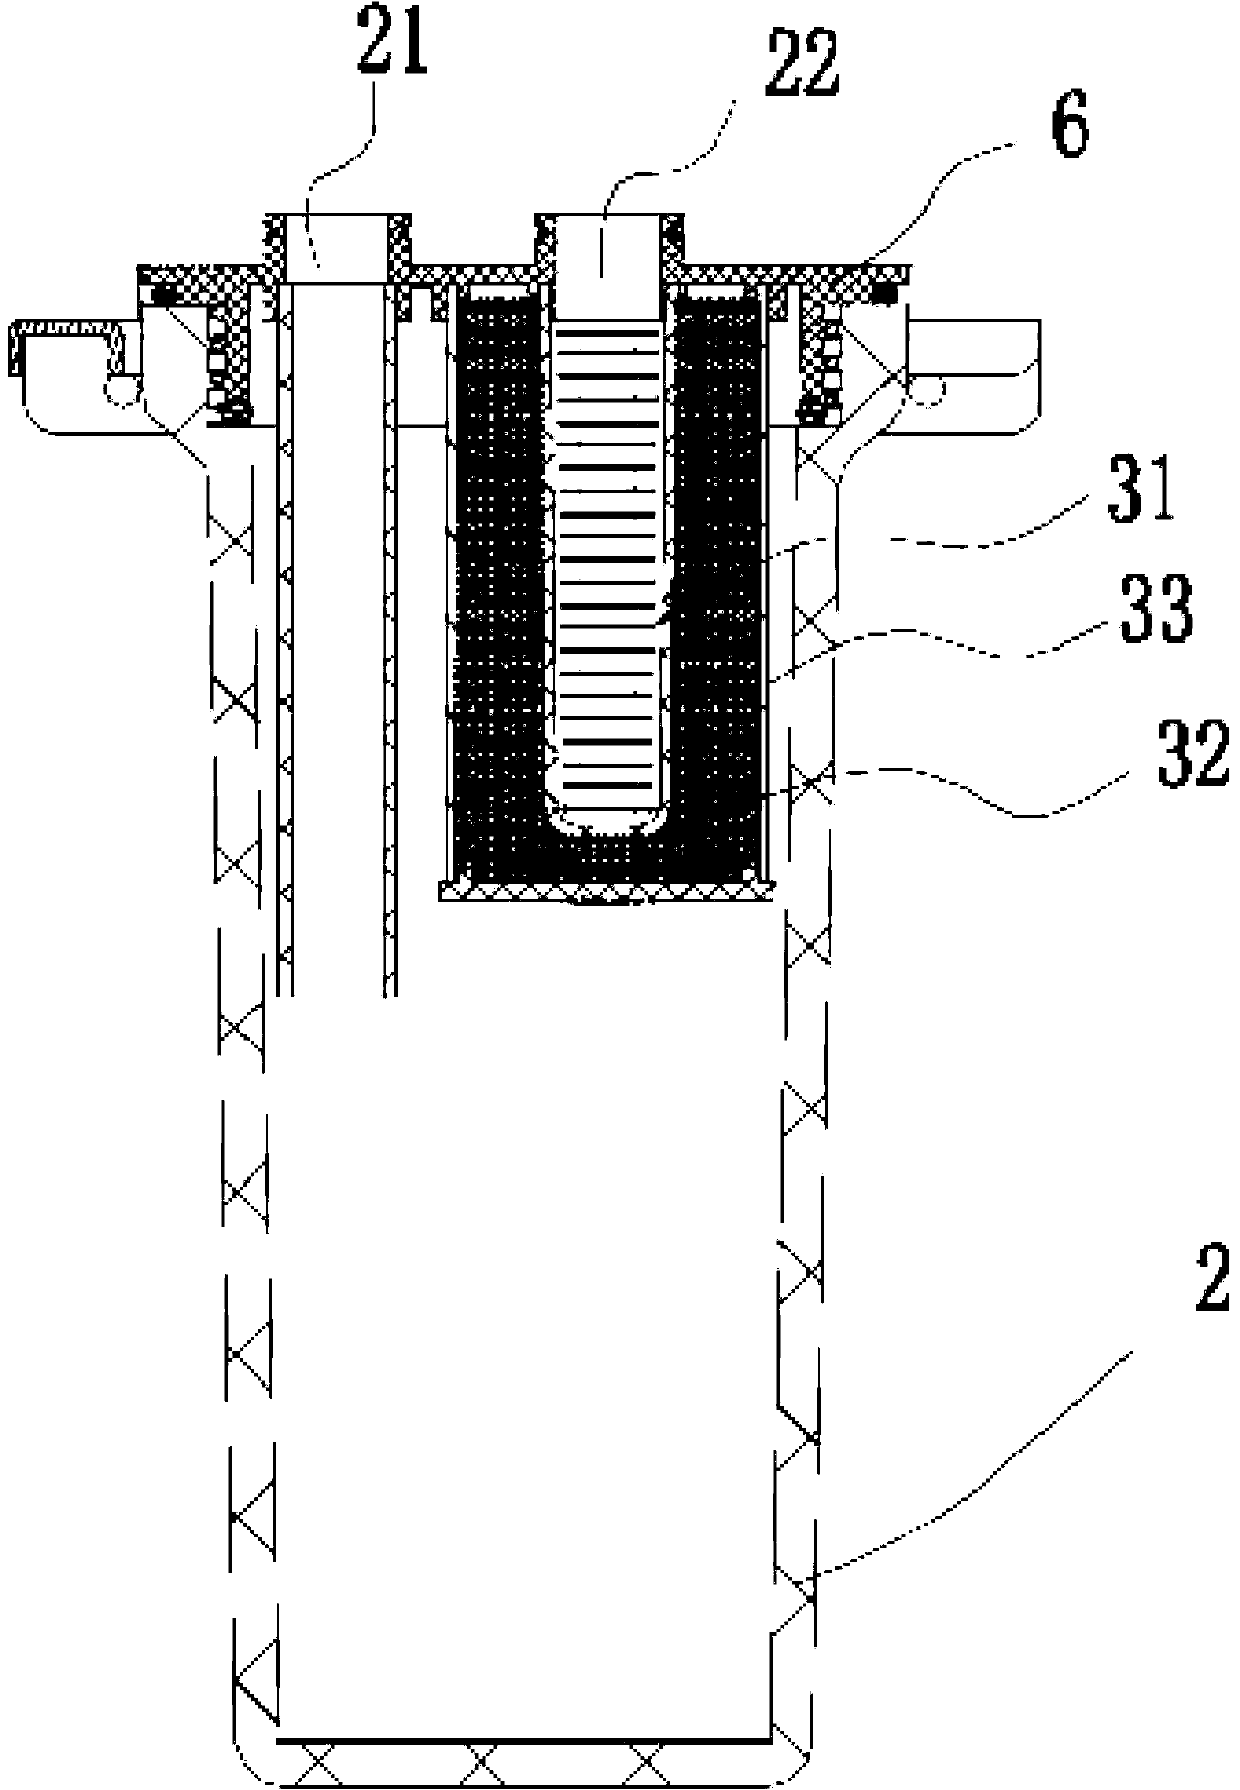 Heavy metal separating device